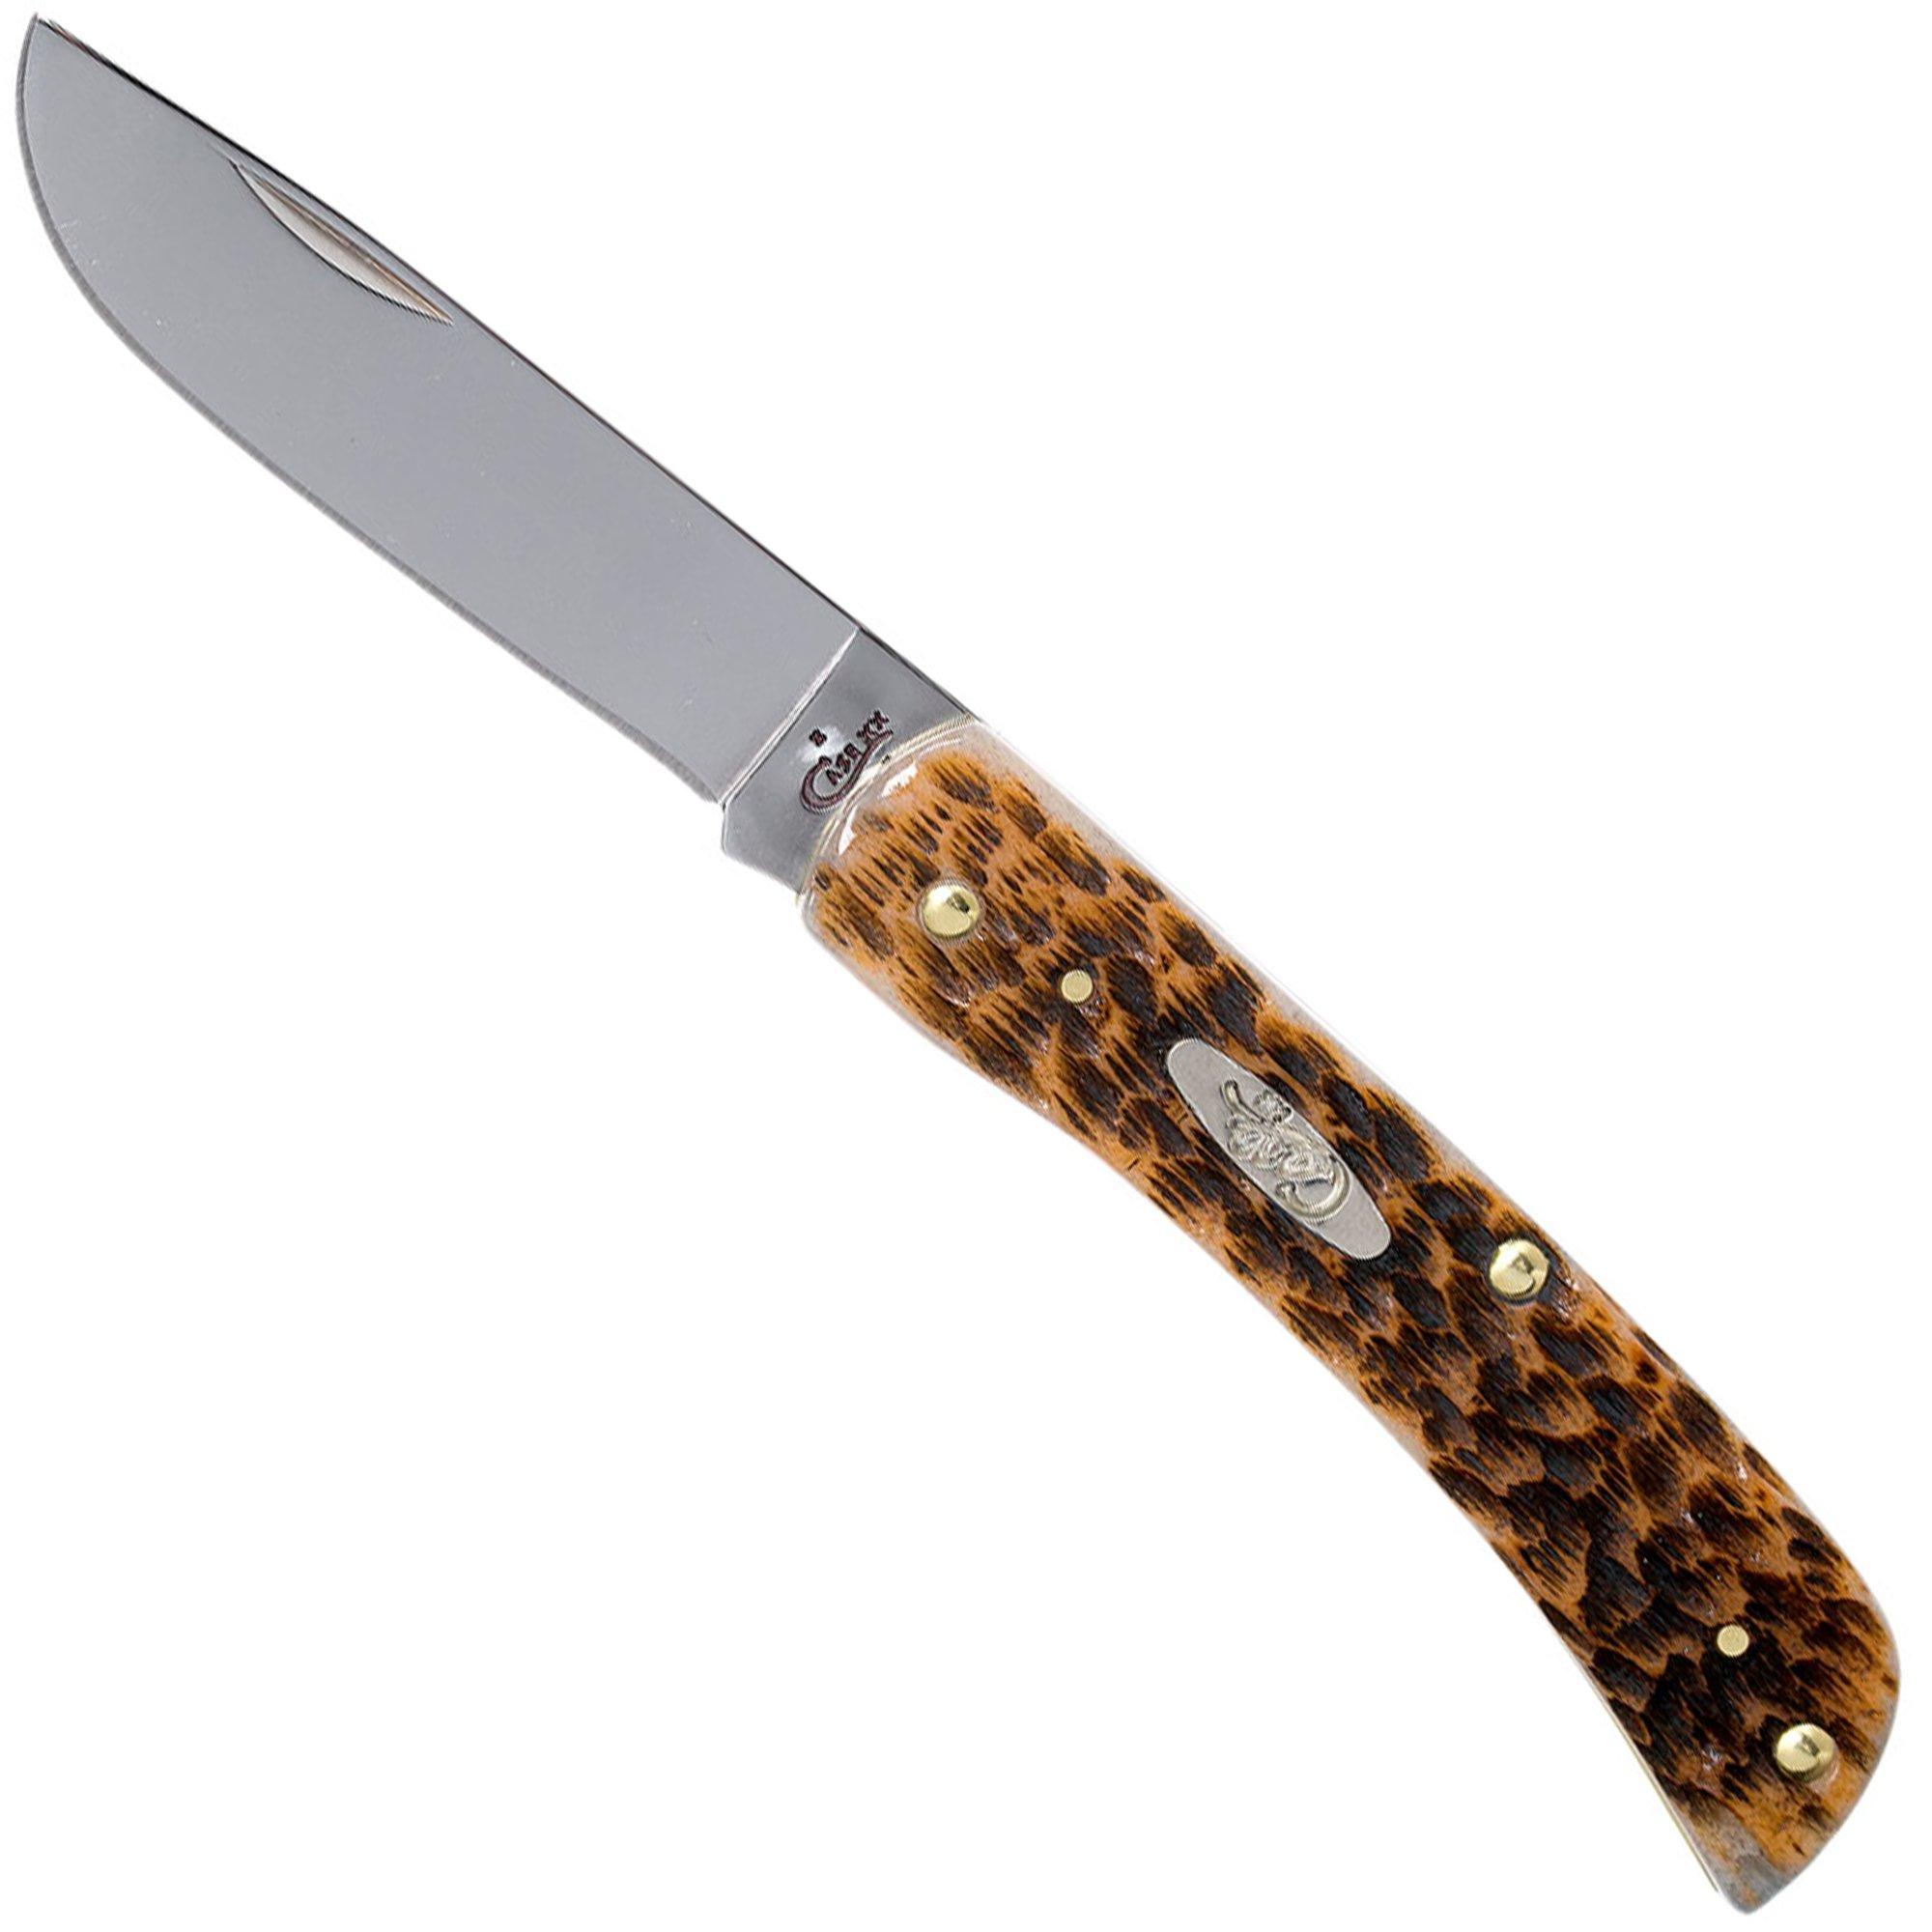 Case Sodbuster Knife 4.625 Yellow Synthetic (3138 CV) 038 - Blade HQ